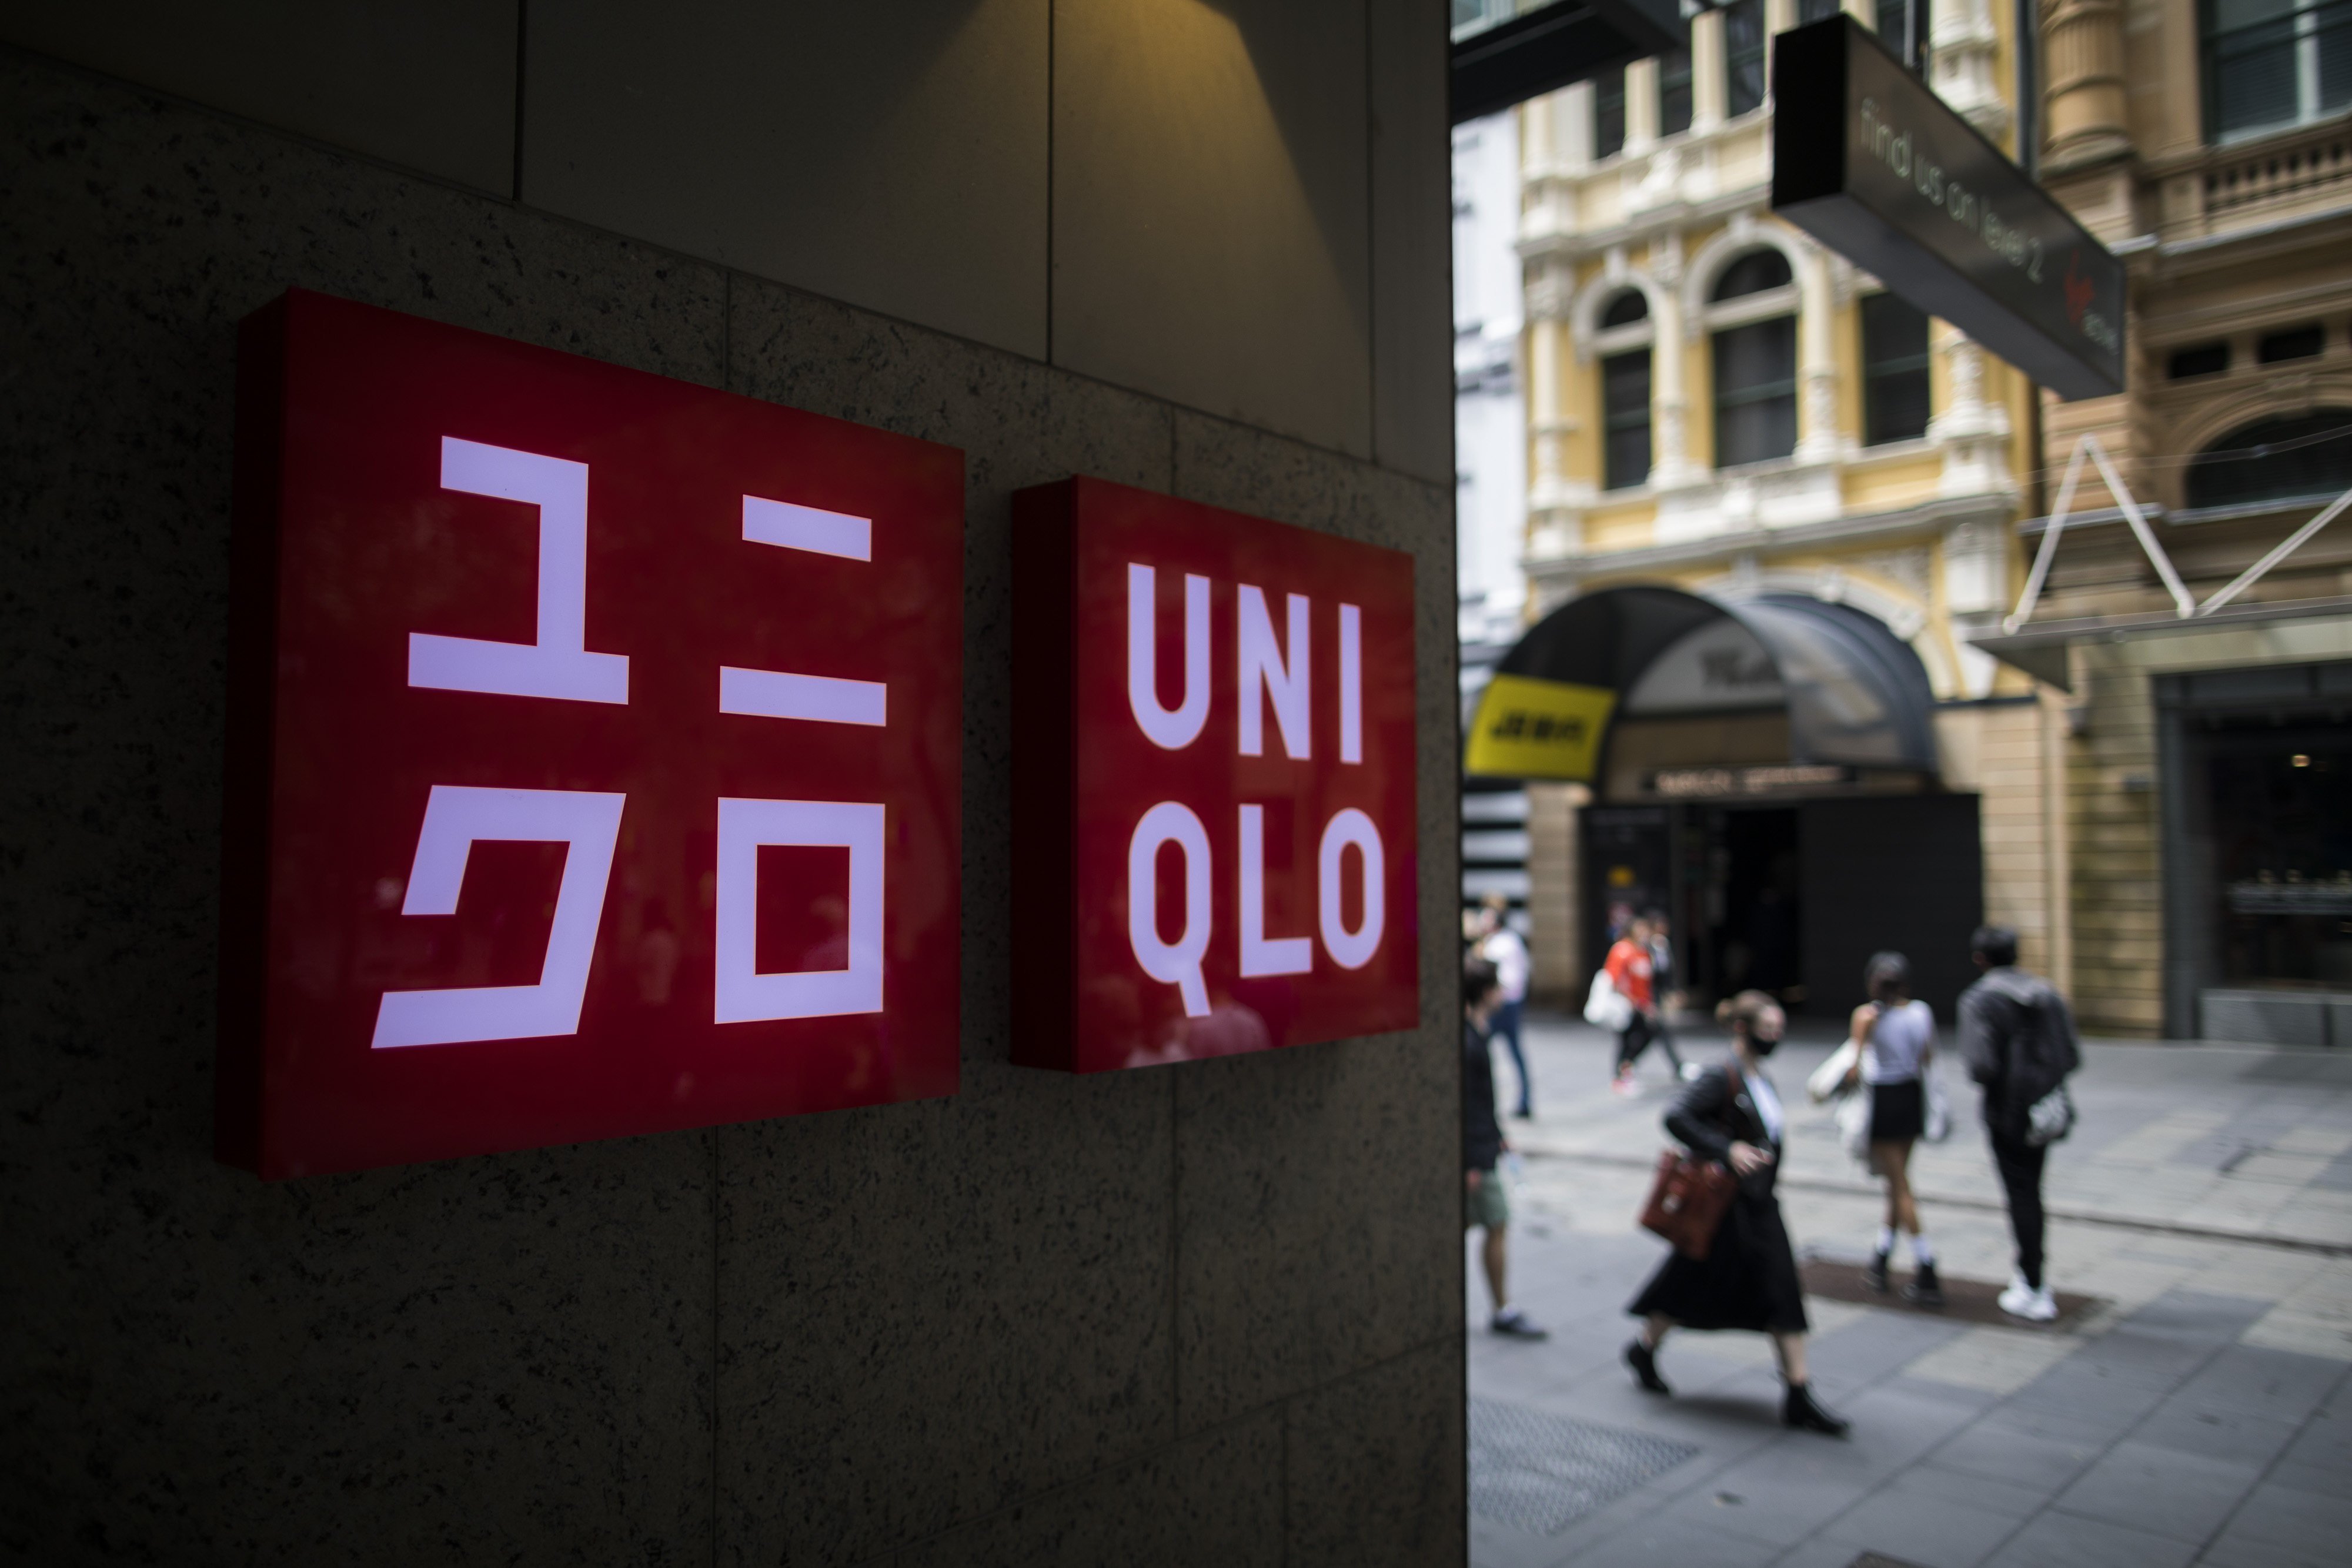 Uniqlo got its name by mistake because there was a typo